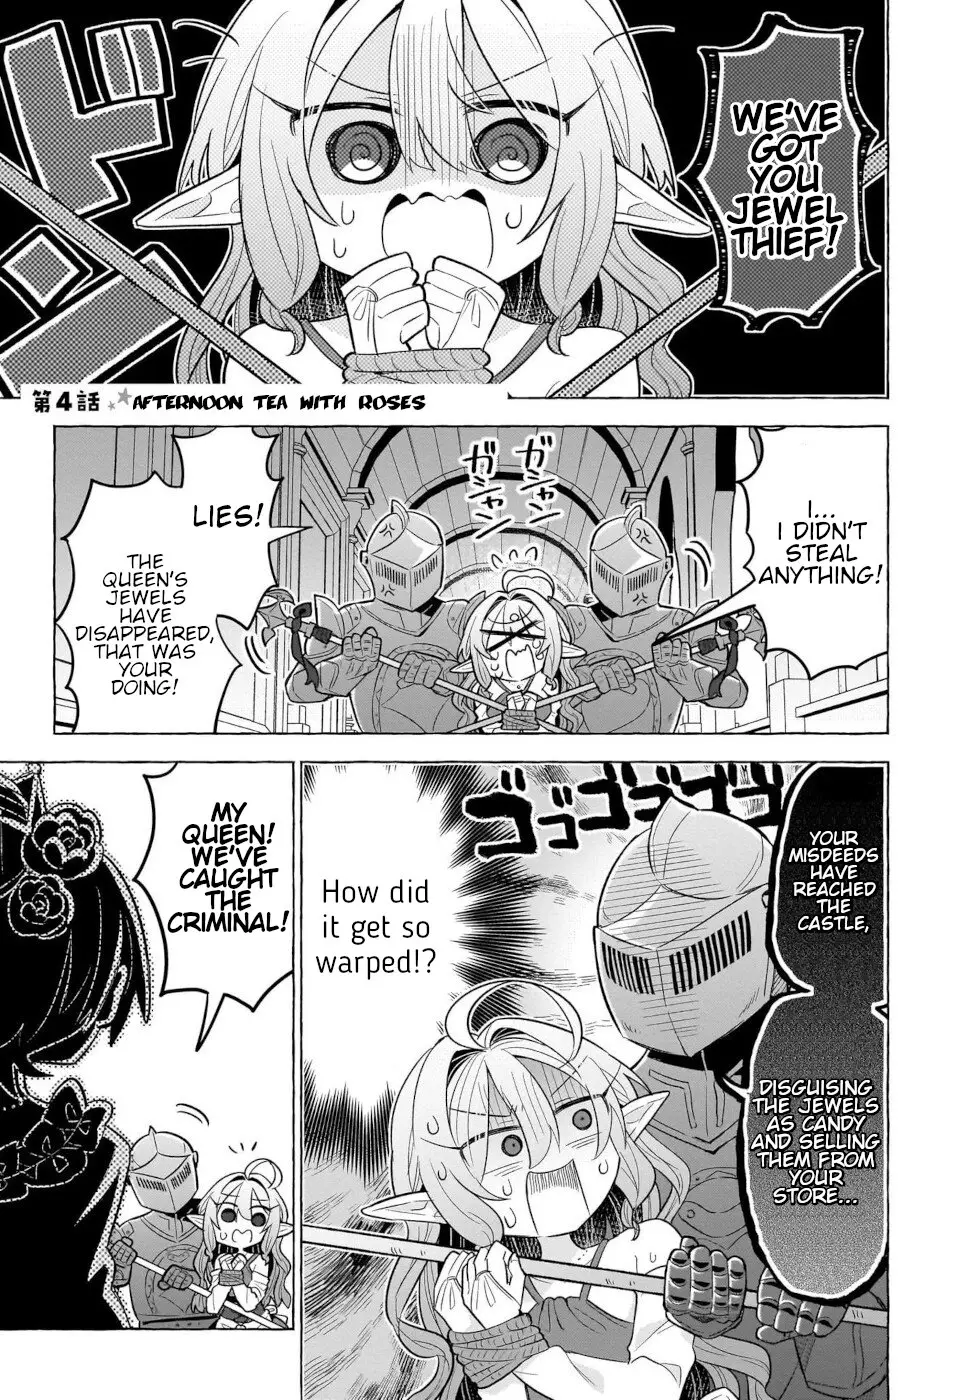 Sweets, Elf, And A High School Girl - 4 page 1-6ee2920d